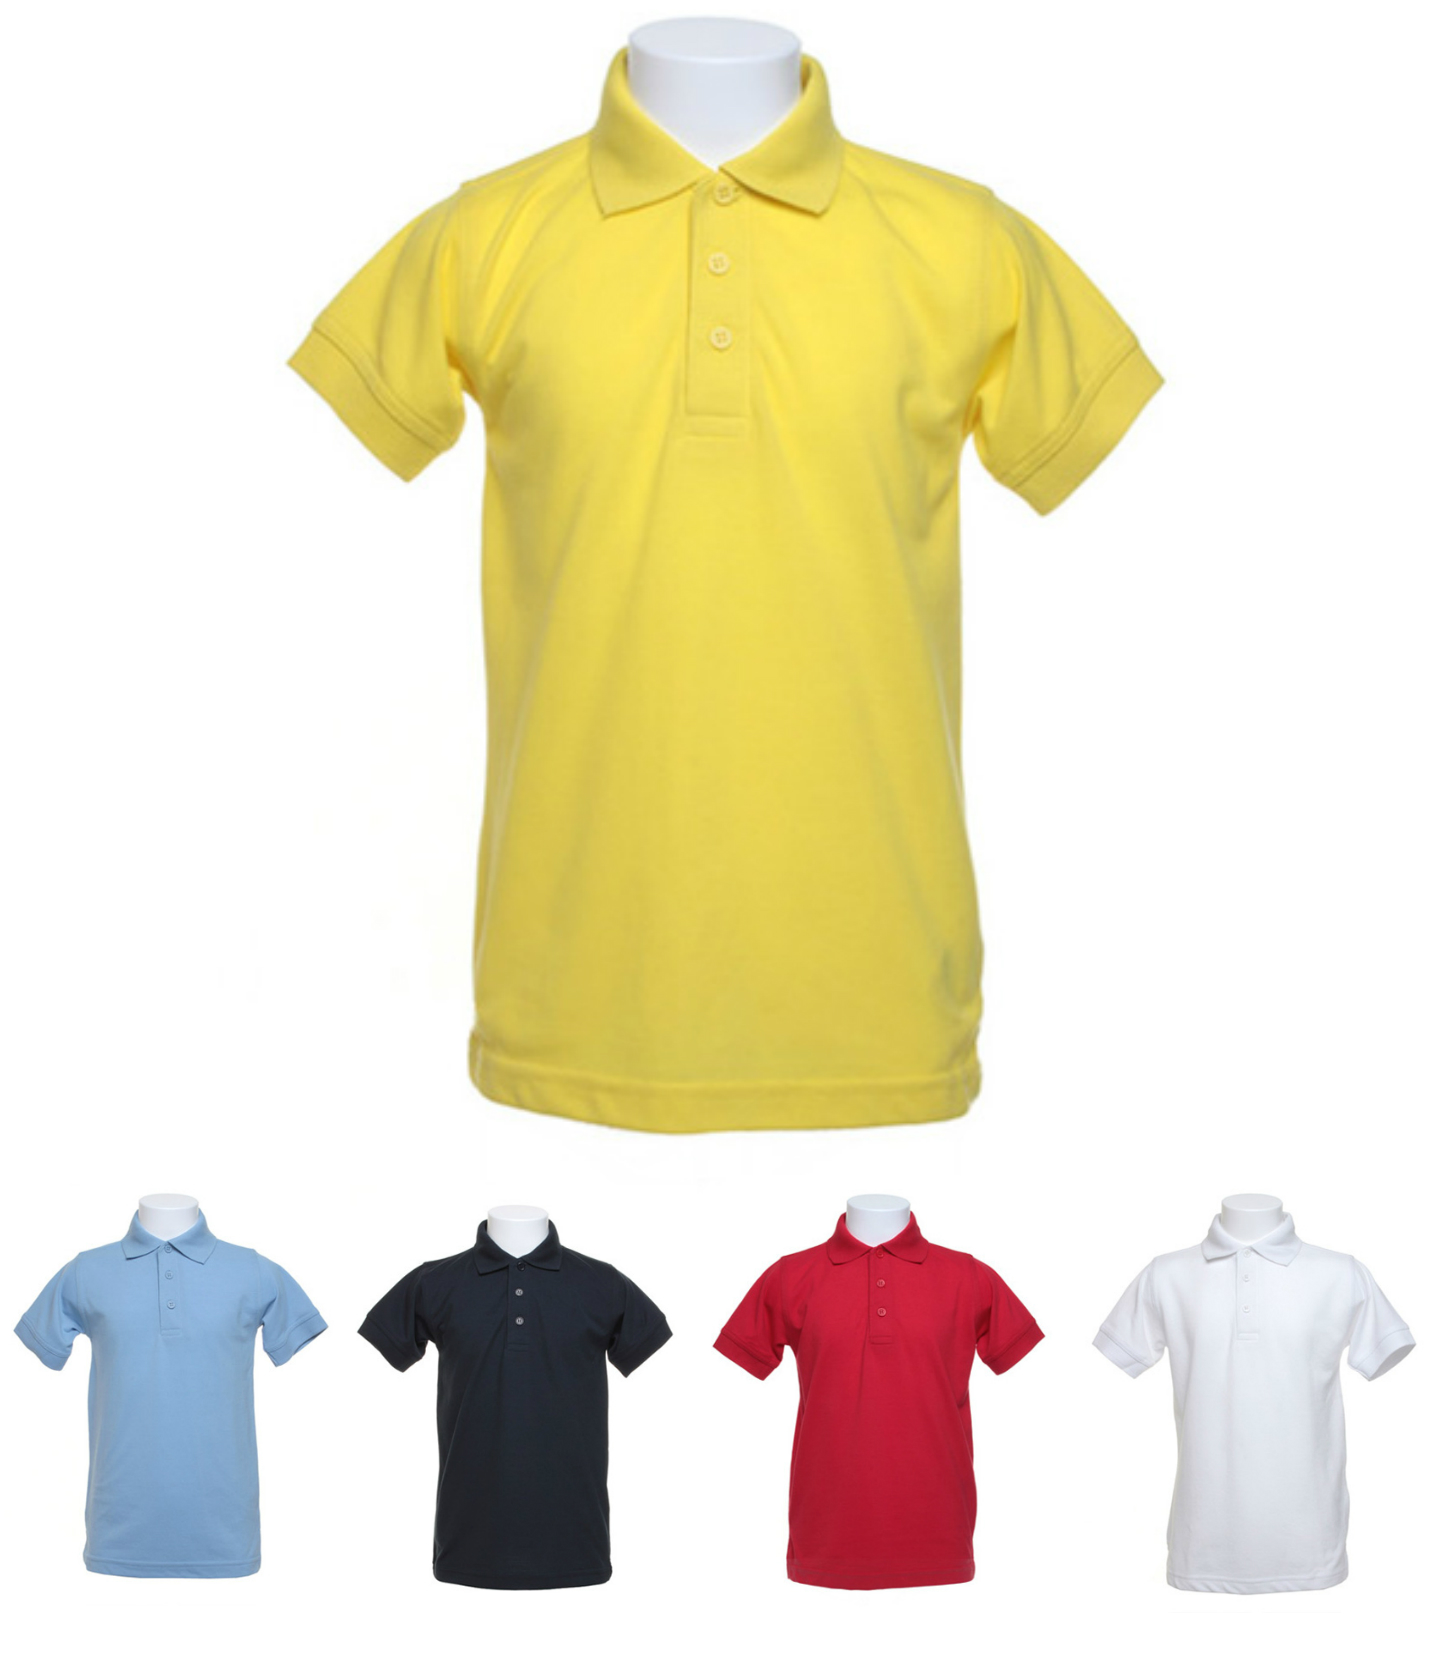 Children's Polo Shirt | Branded Safety Workwear | Safety Stock